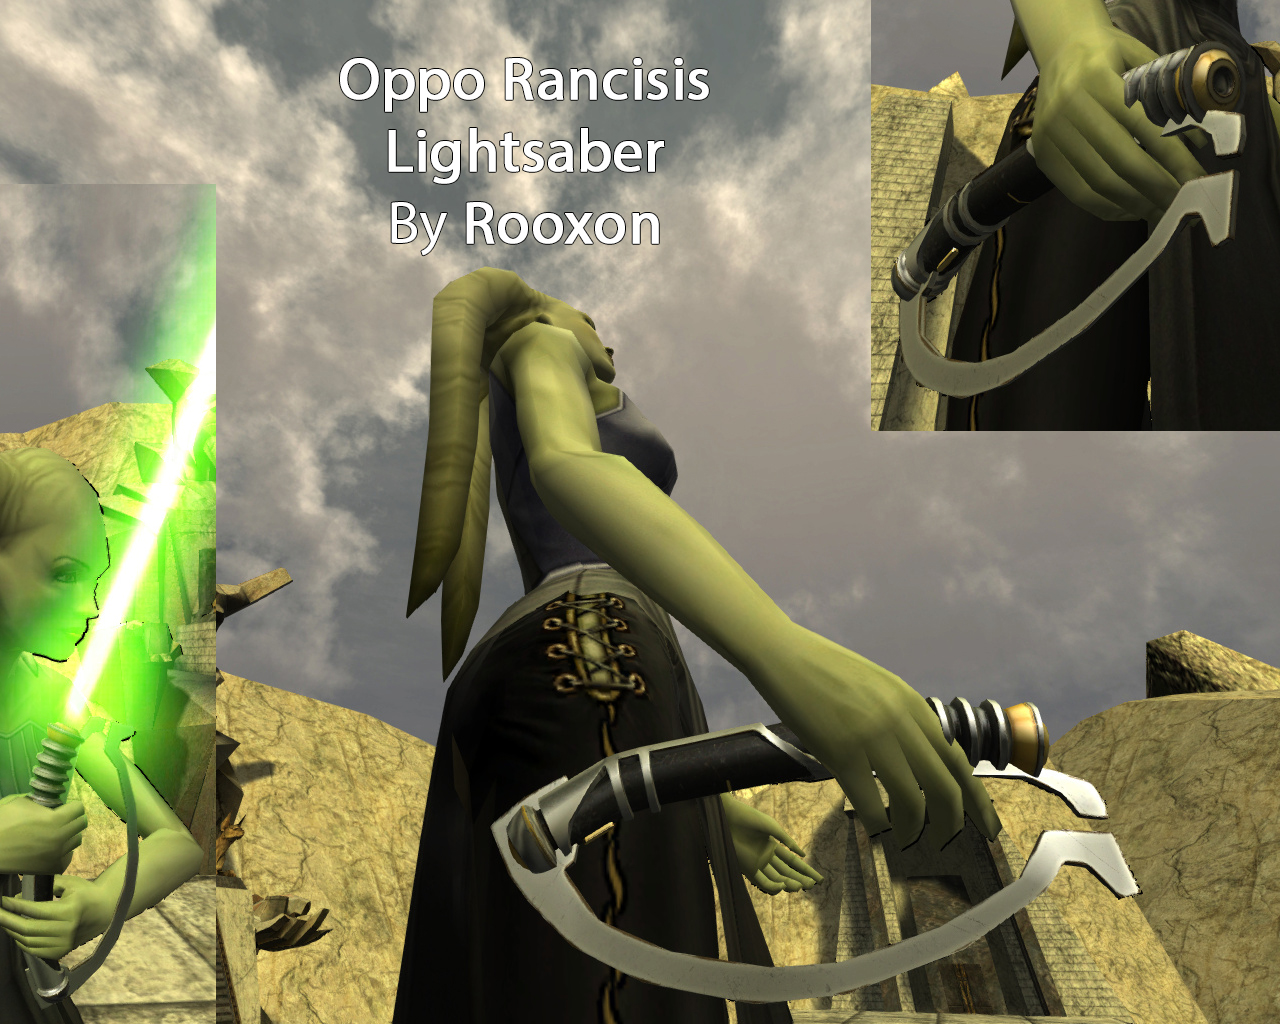 More information about "Oppo Rancisis's Lightsaber"